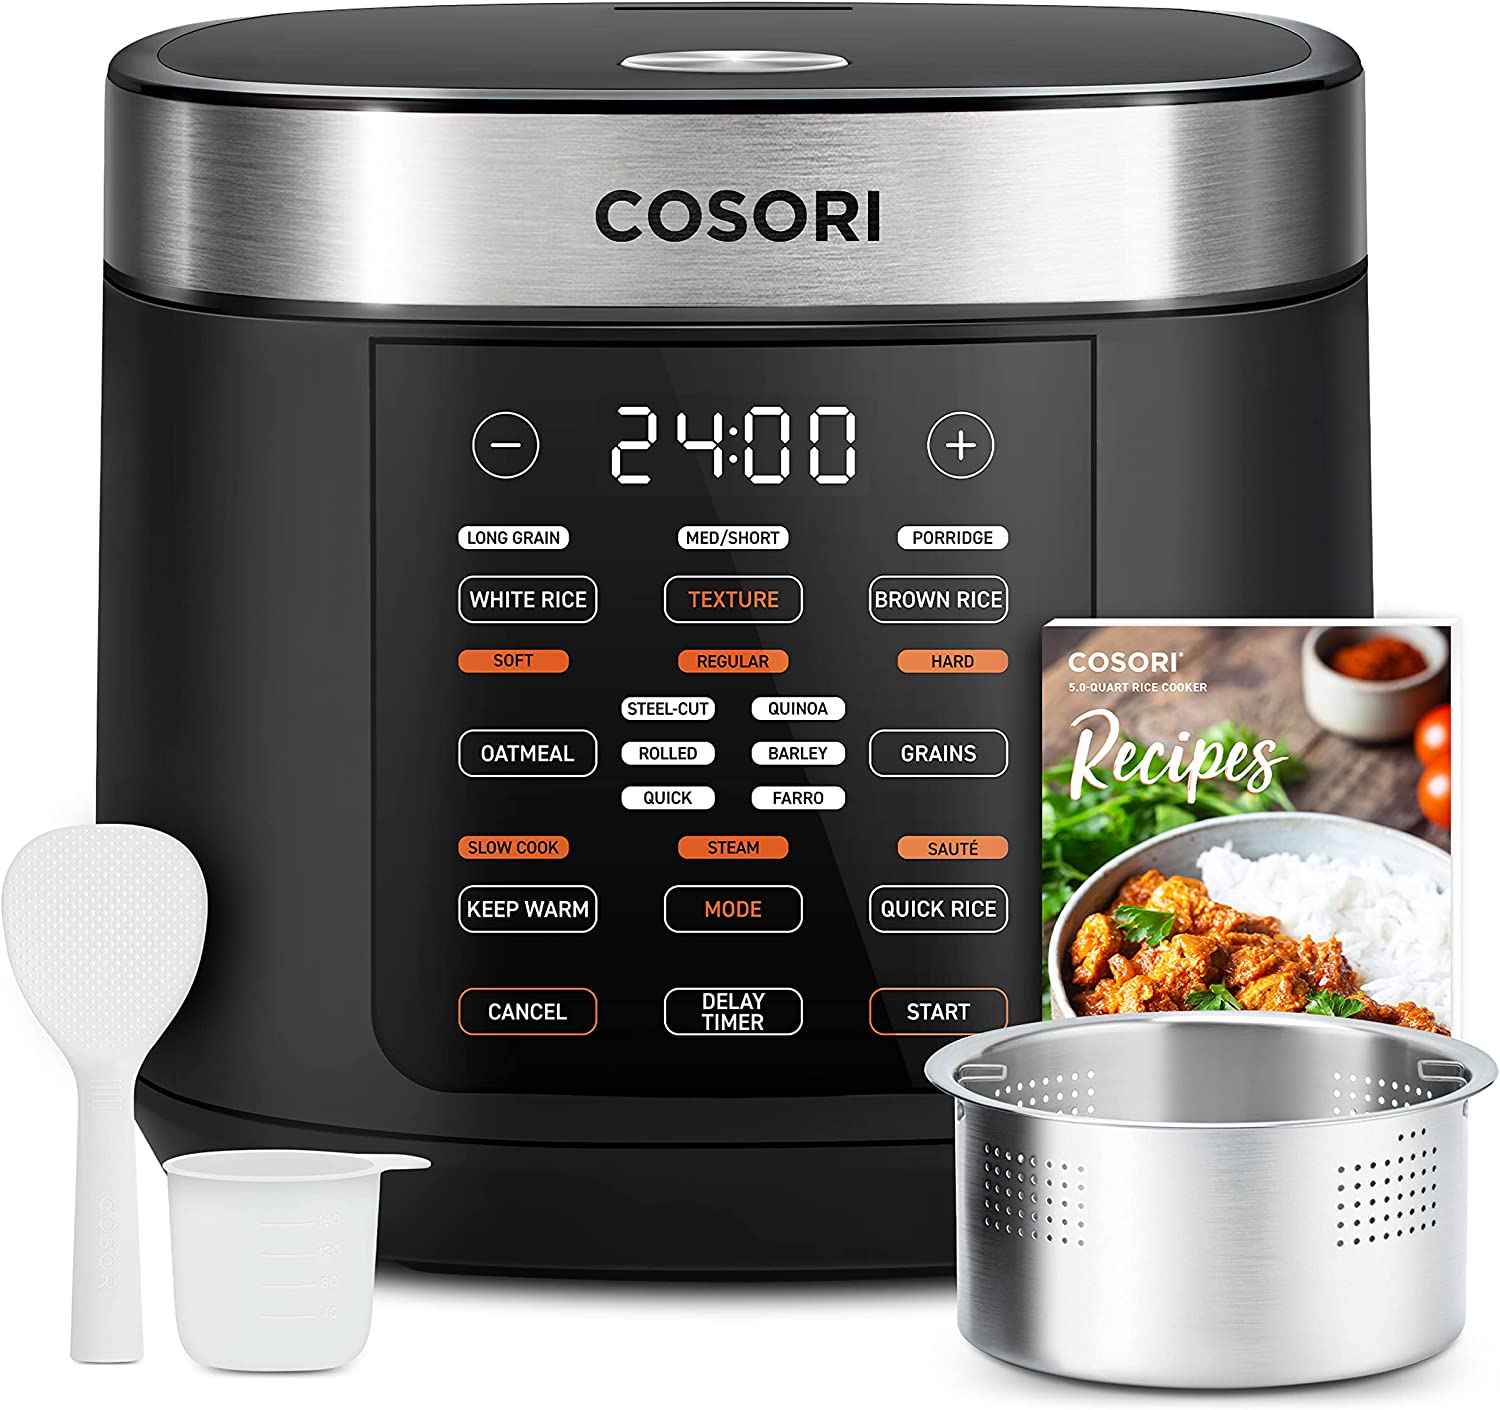 https://bigbigmart.com/wp-content/uploads/2023/07/COSORI-Rice-Cooker-Large-Maker-10-Cup-Uncooked-18-Functions-Japanese-Style-Fuzzy-Logic-Micom-Technology-Texture-Optional-50-Recipes-Stainless-Steel-Steamer-Warmer-Timer-Olla-Arrocera-ElectricaBlack.jpg